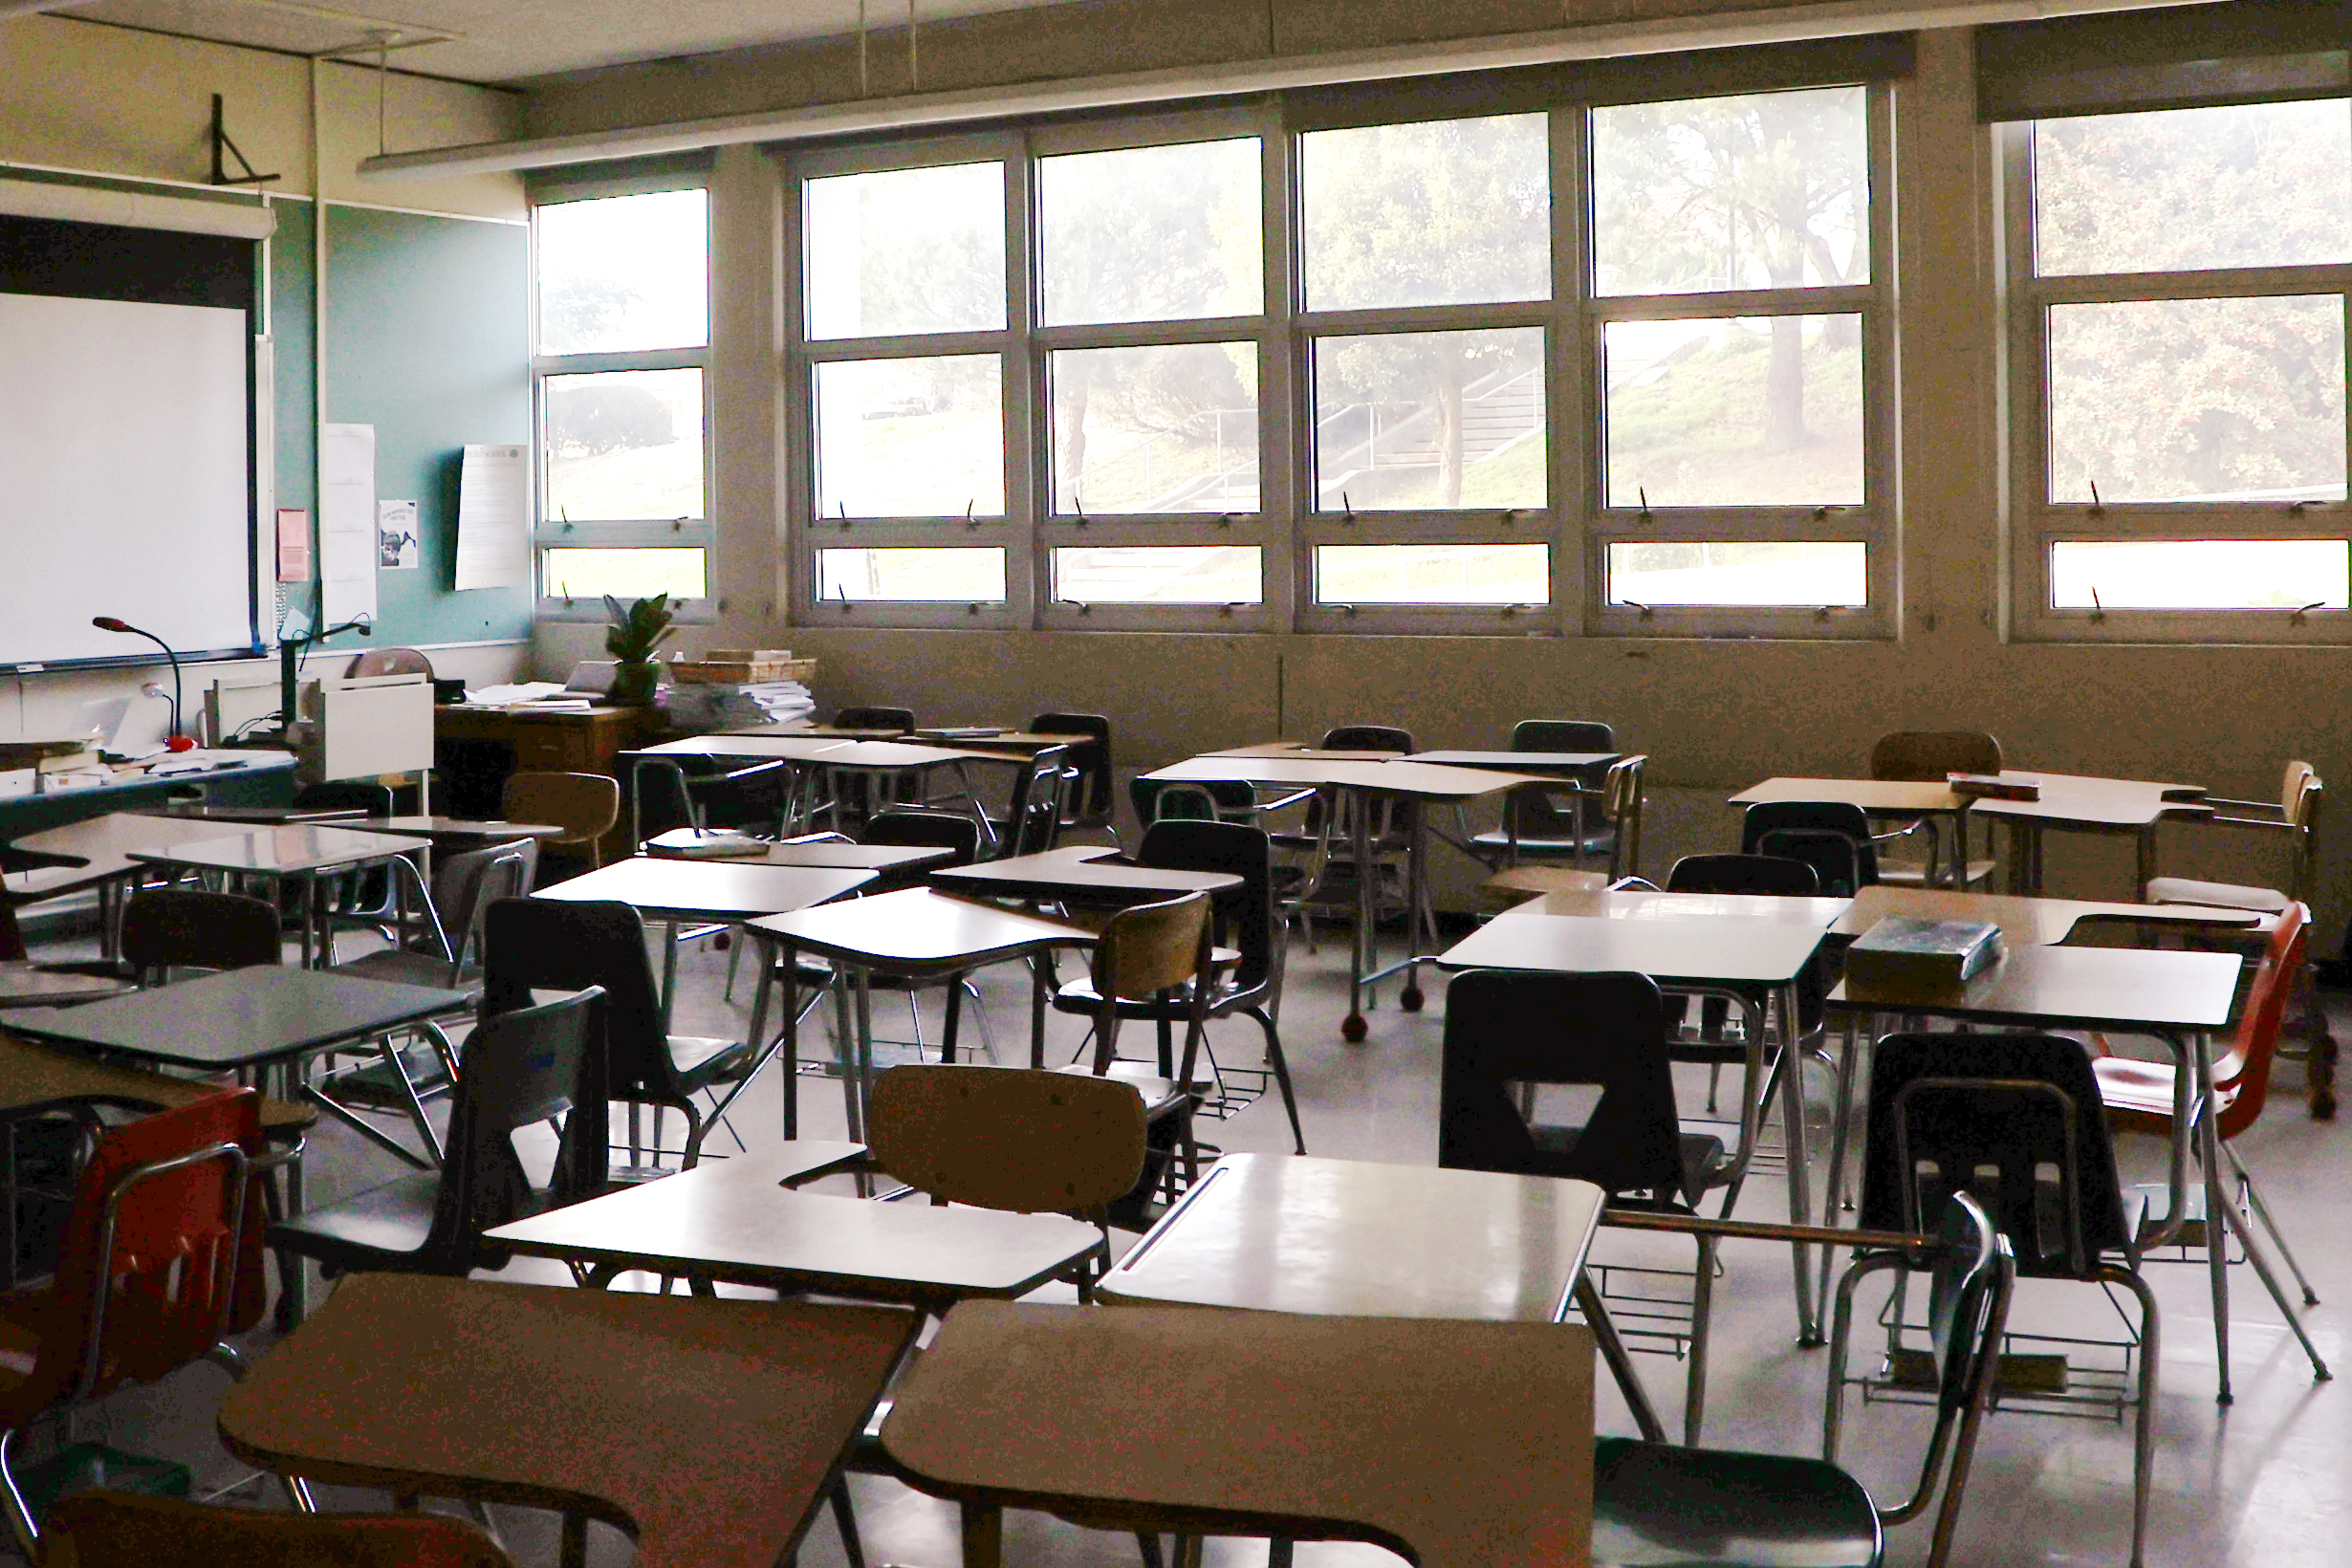 A corner view of an empty classroom.